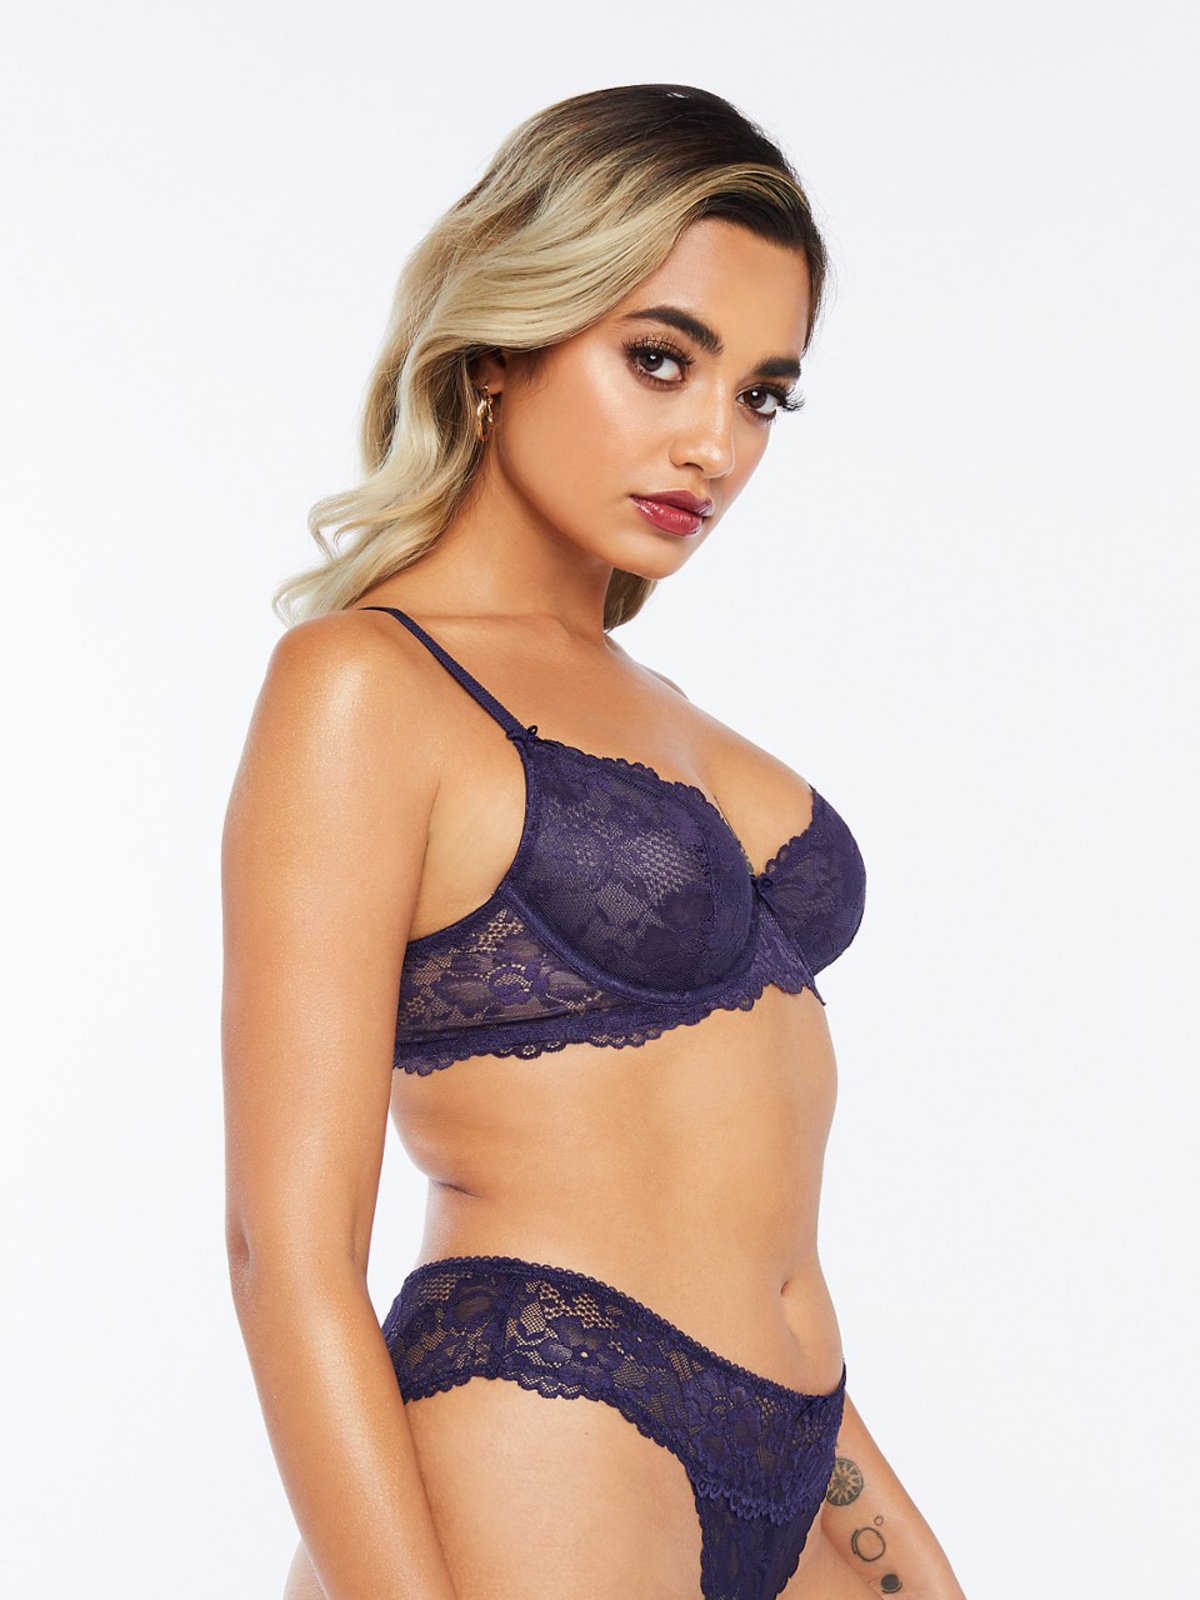 Unlined Microfiber and Lace Bra - Navy floral